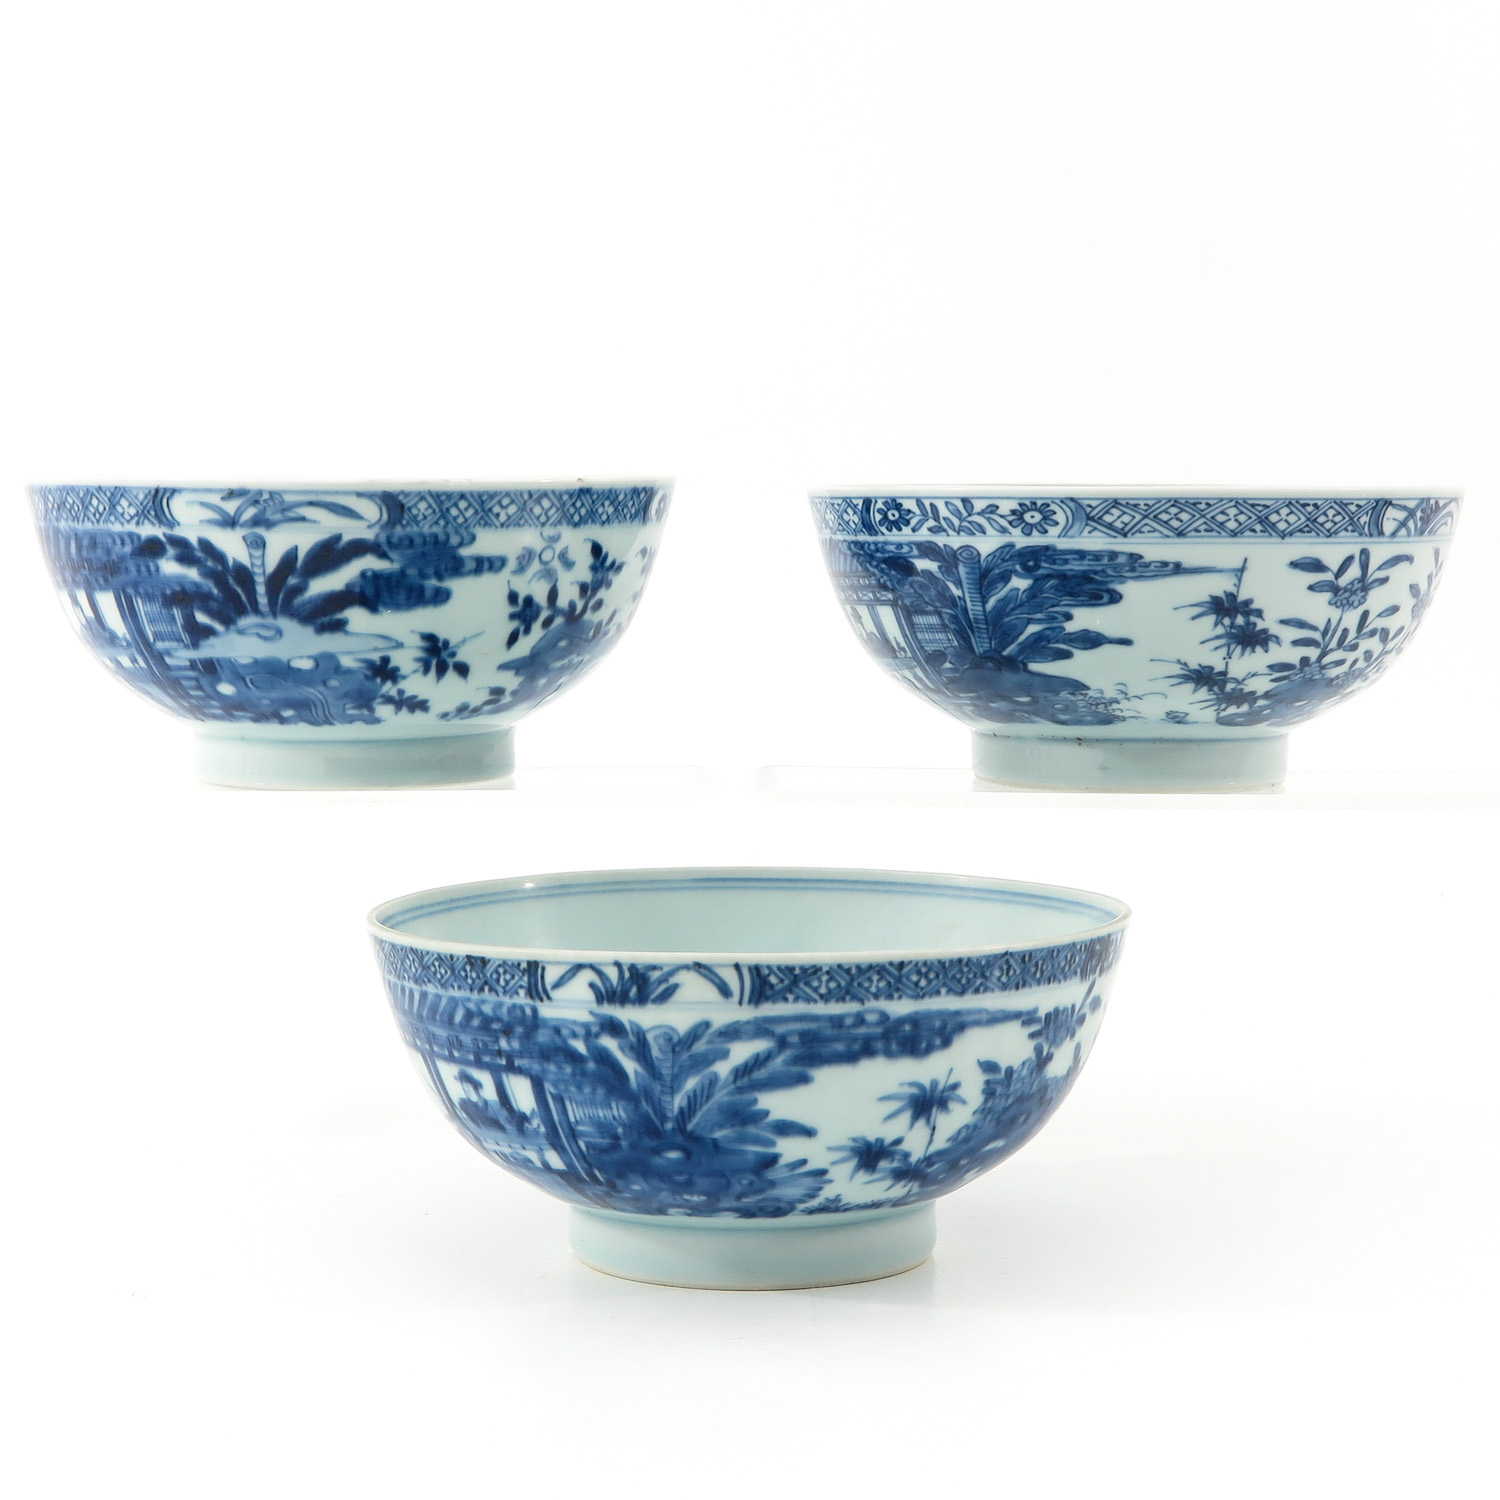 A Series of 3 Blue and White Bowls - Image 3 of 10